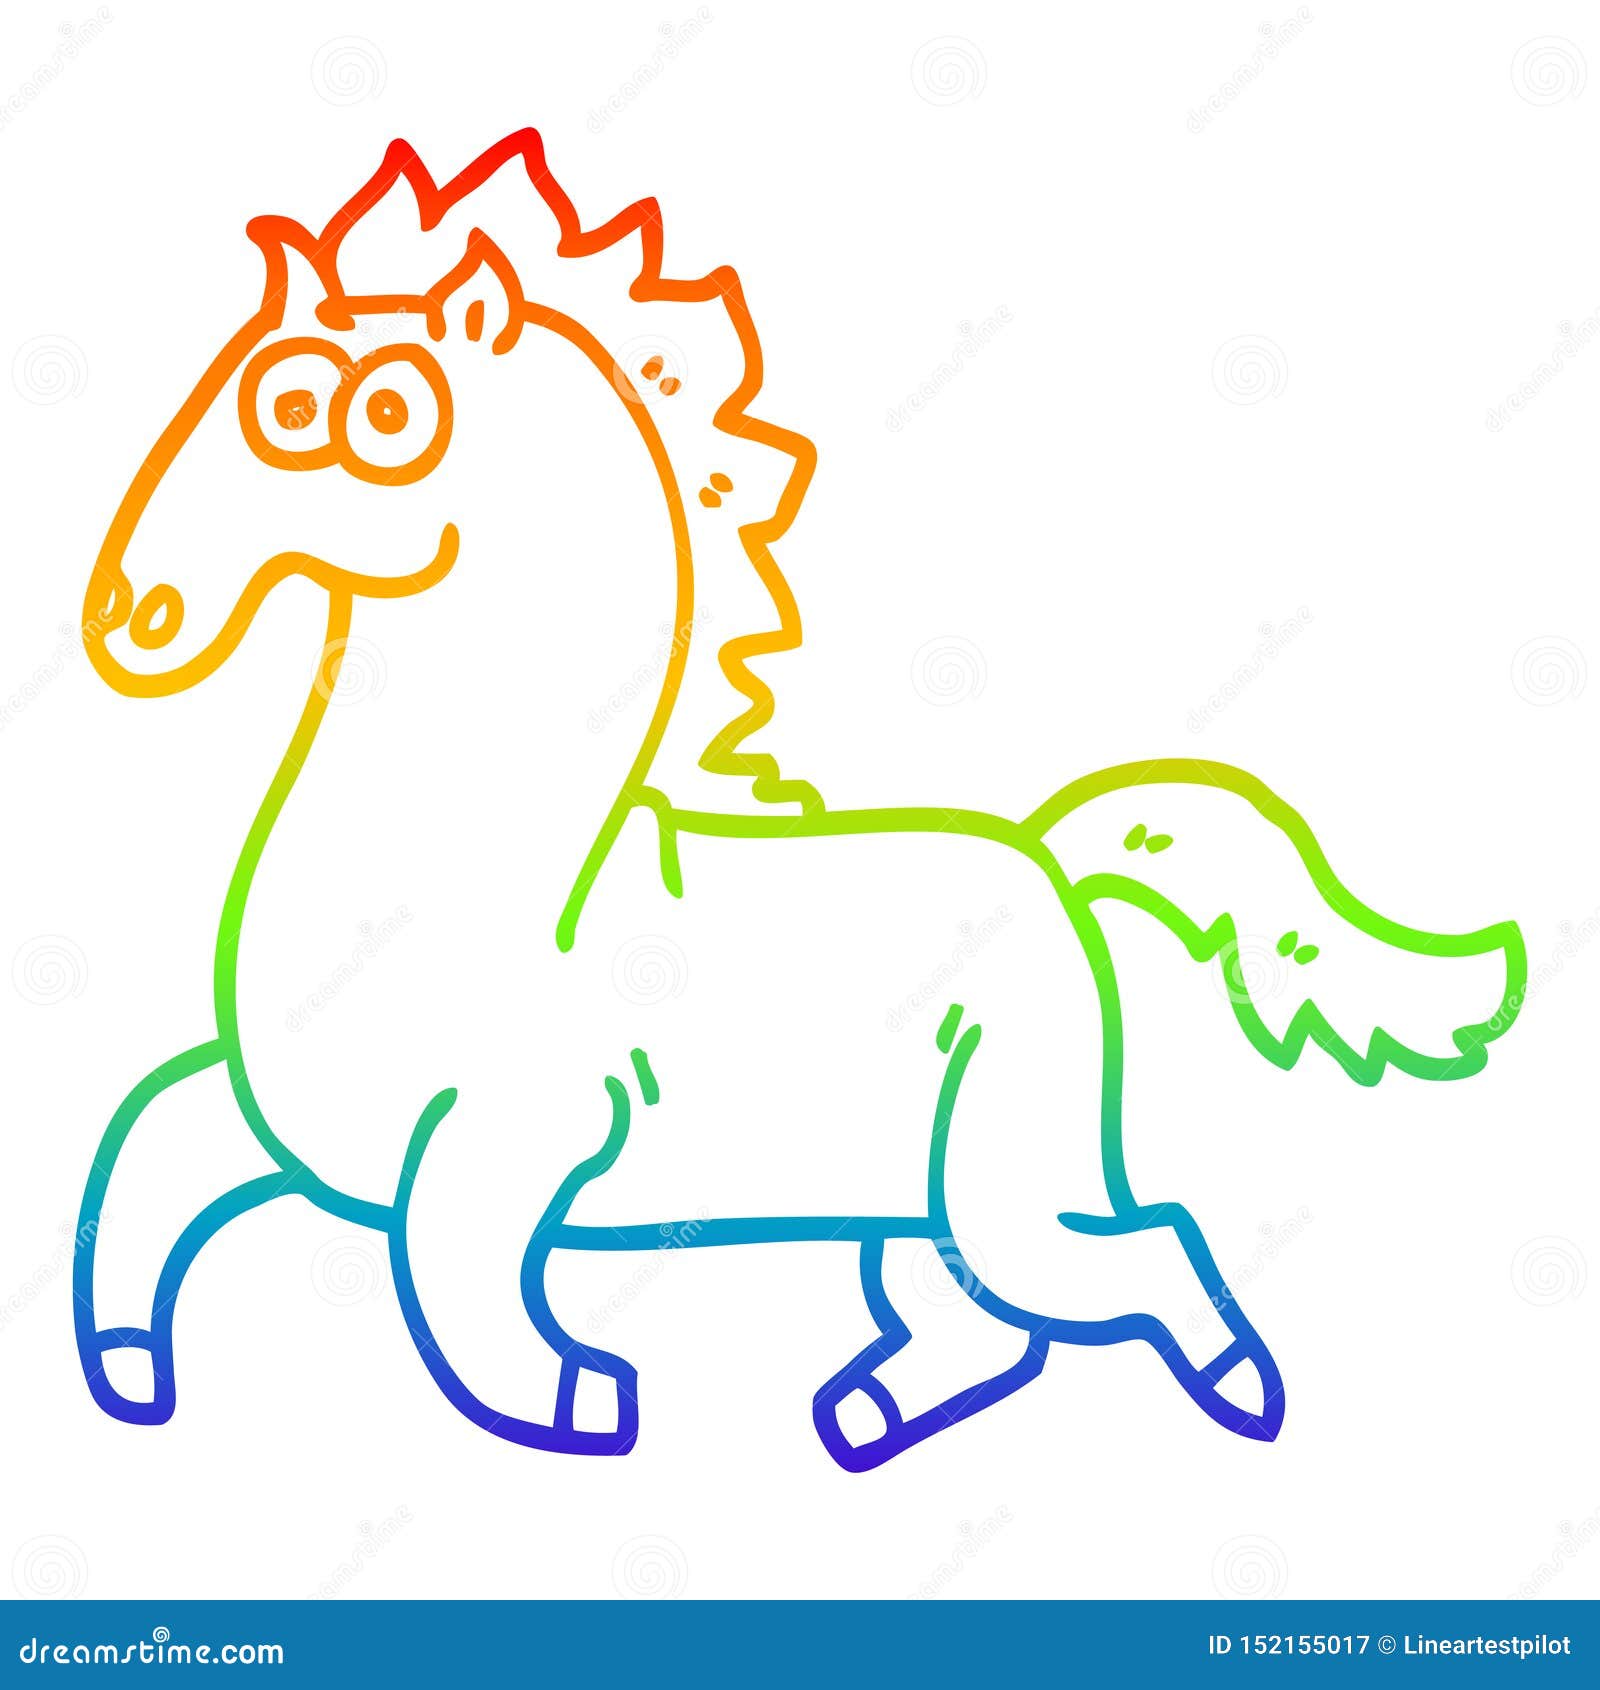 A Creative Rainbow Gradient Line Drawing Cartoon Running Horse Stock Vector  - Illustration of horse, scribble: 152155017